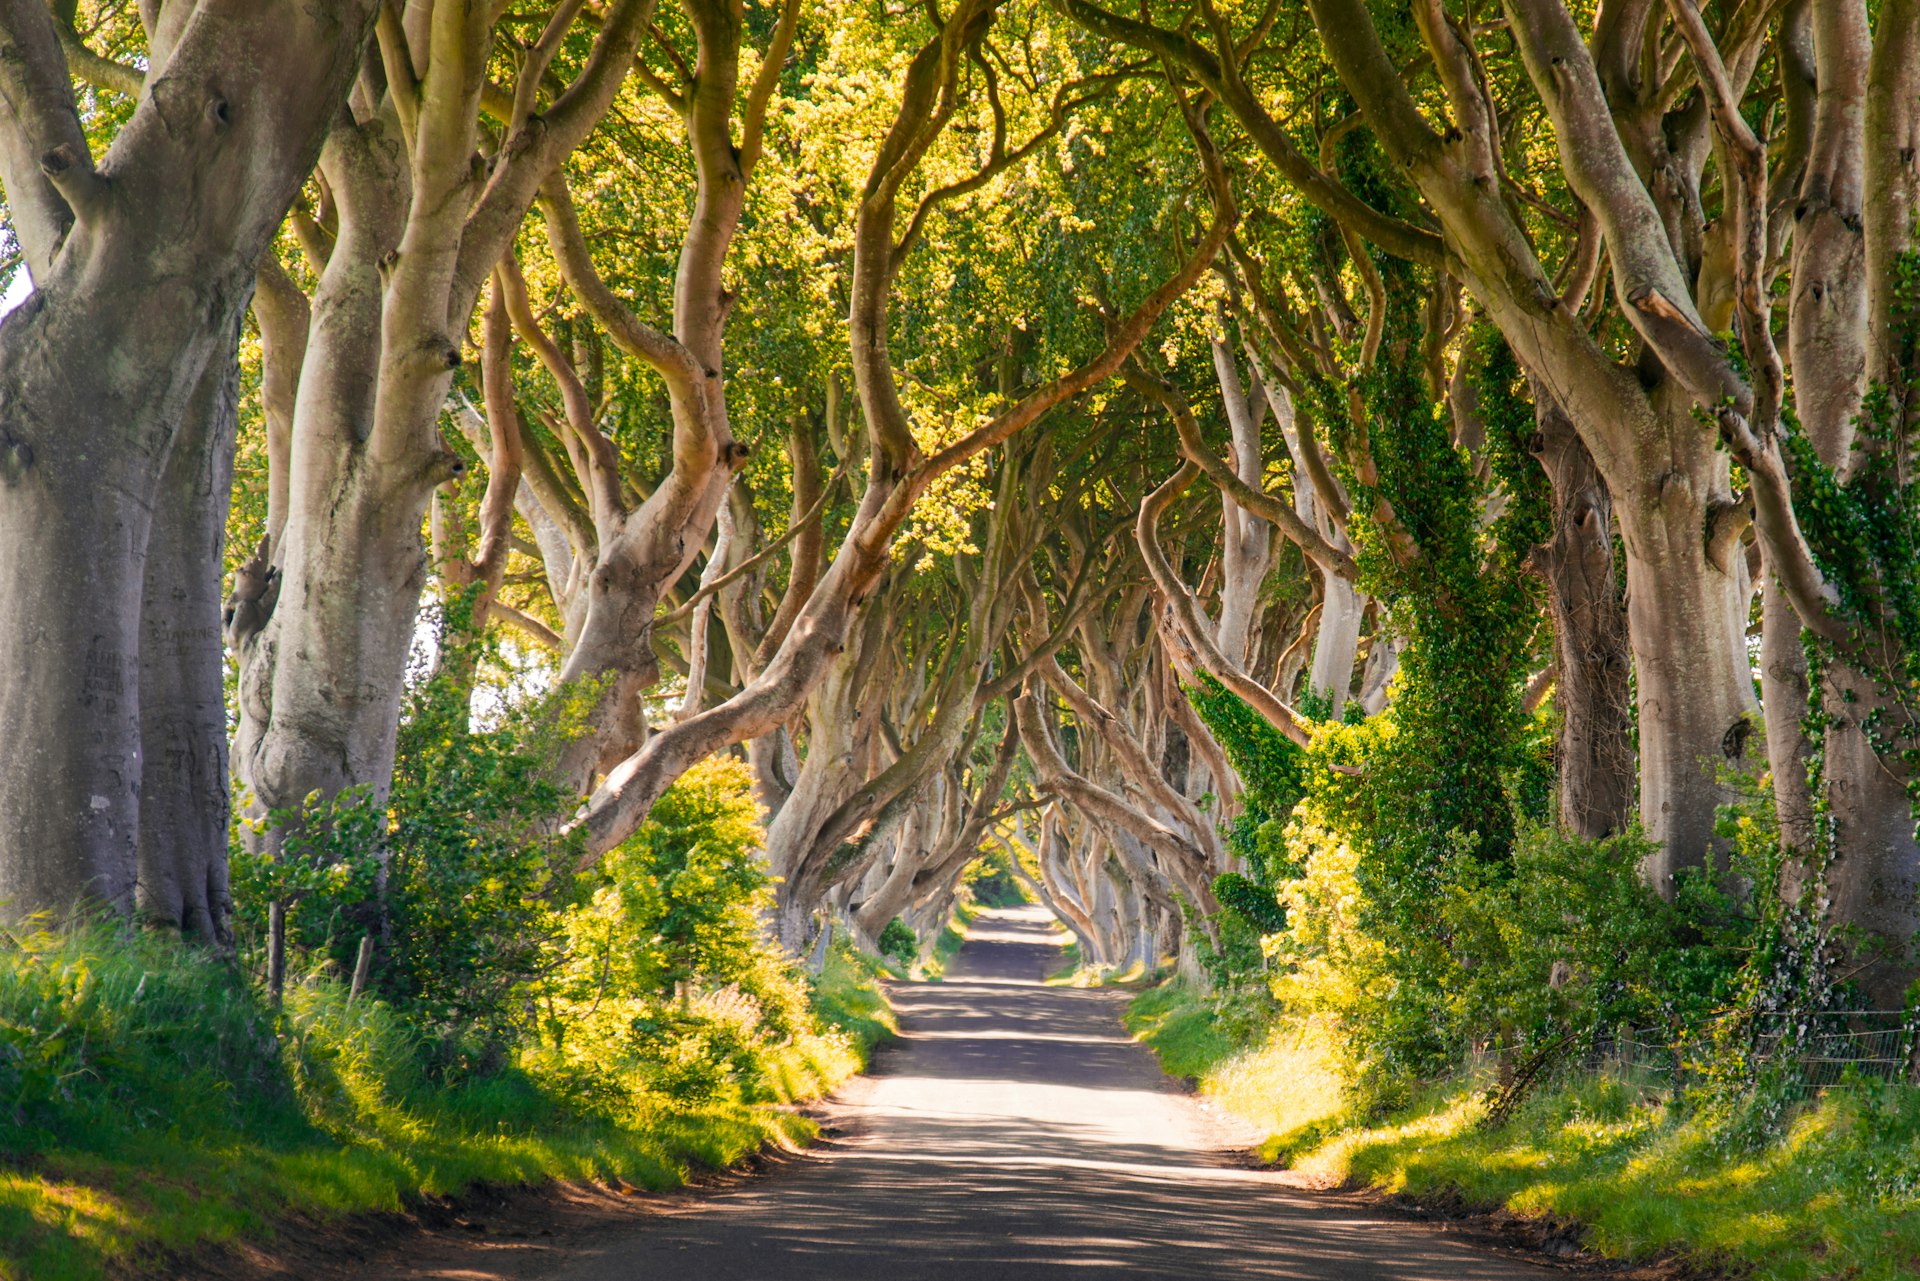 The Dark Hedges is a stand of 300 year old Beech trees on a unique stretch of the Bregagh Road near Armoy, in Northern Ireland.